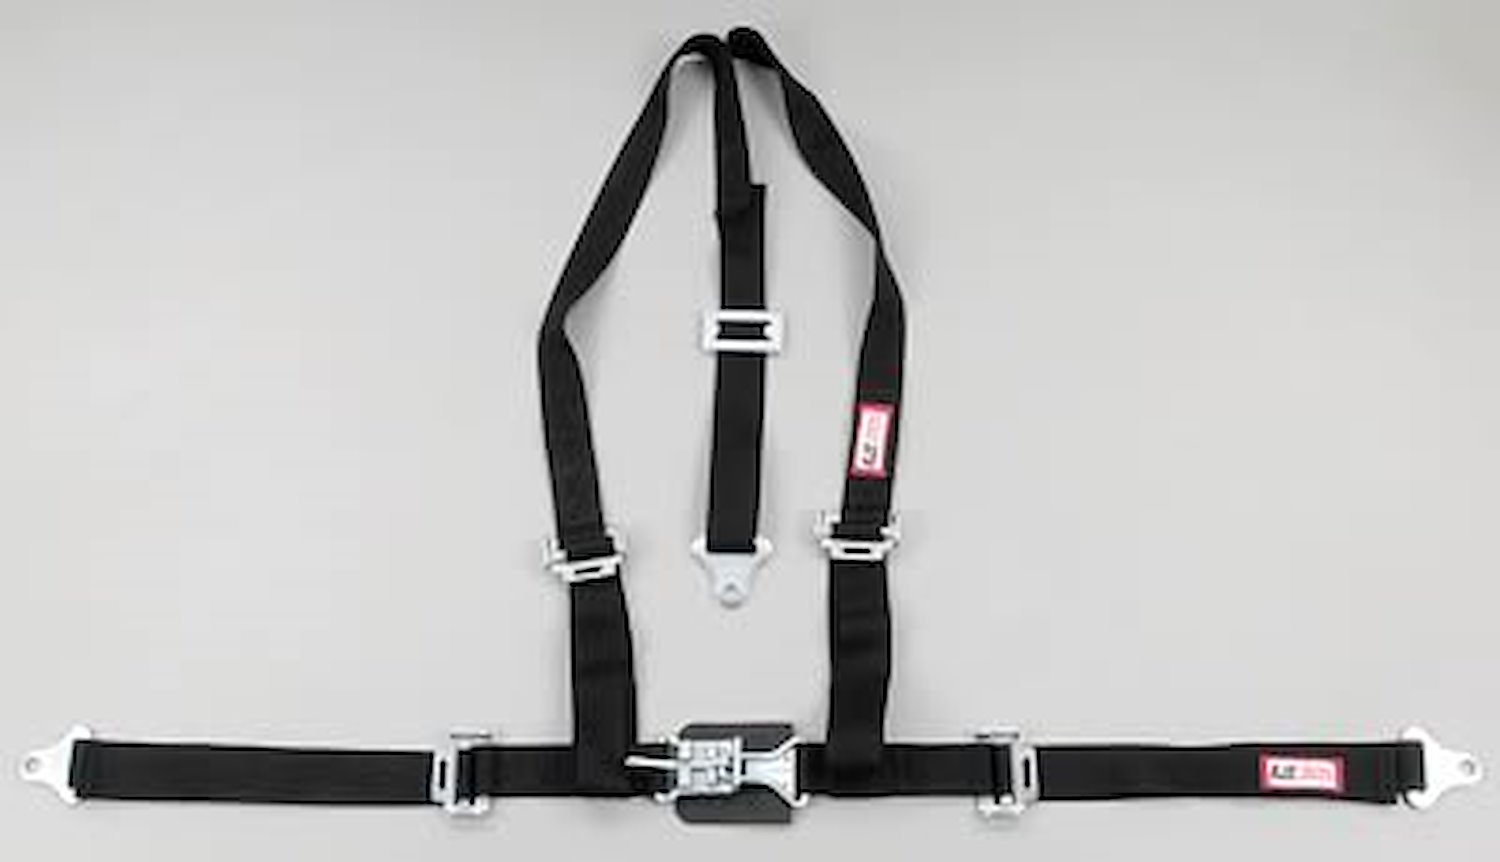 NON-SFI L&L HARNESS 2 PULL DOWN Lap Belt w/Adjuster 2 S.H. Individual FLOOR MOUNT w/STERNUM STRAP ALL WRAP ENDS YELLOW